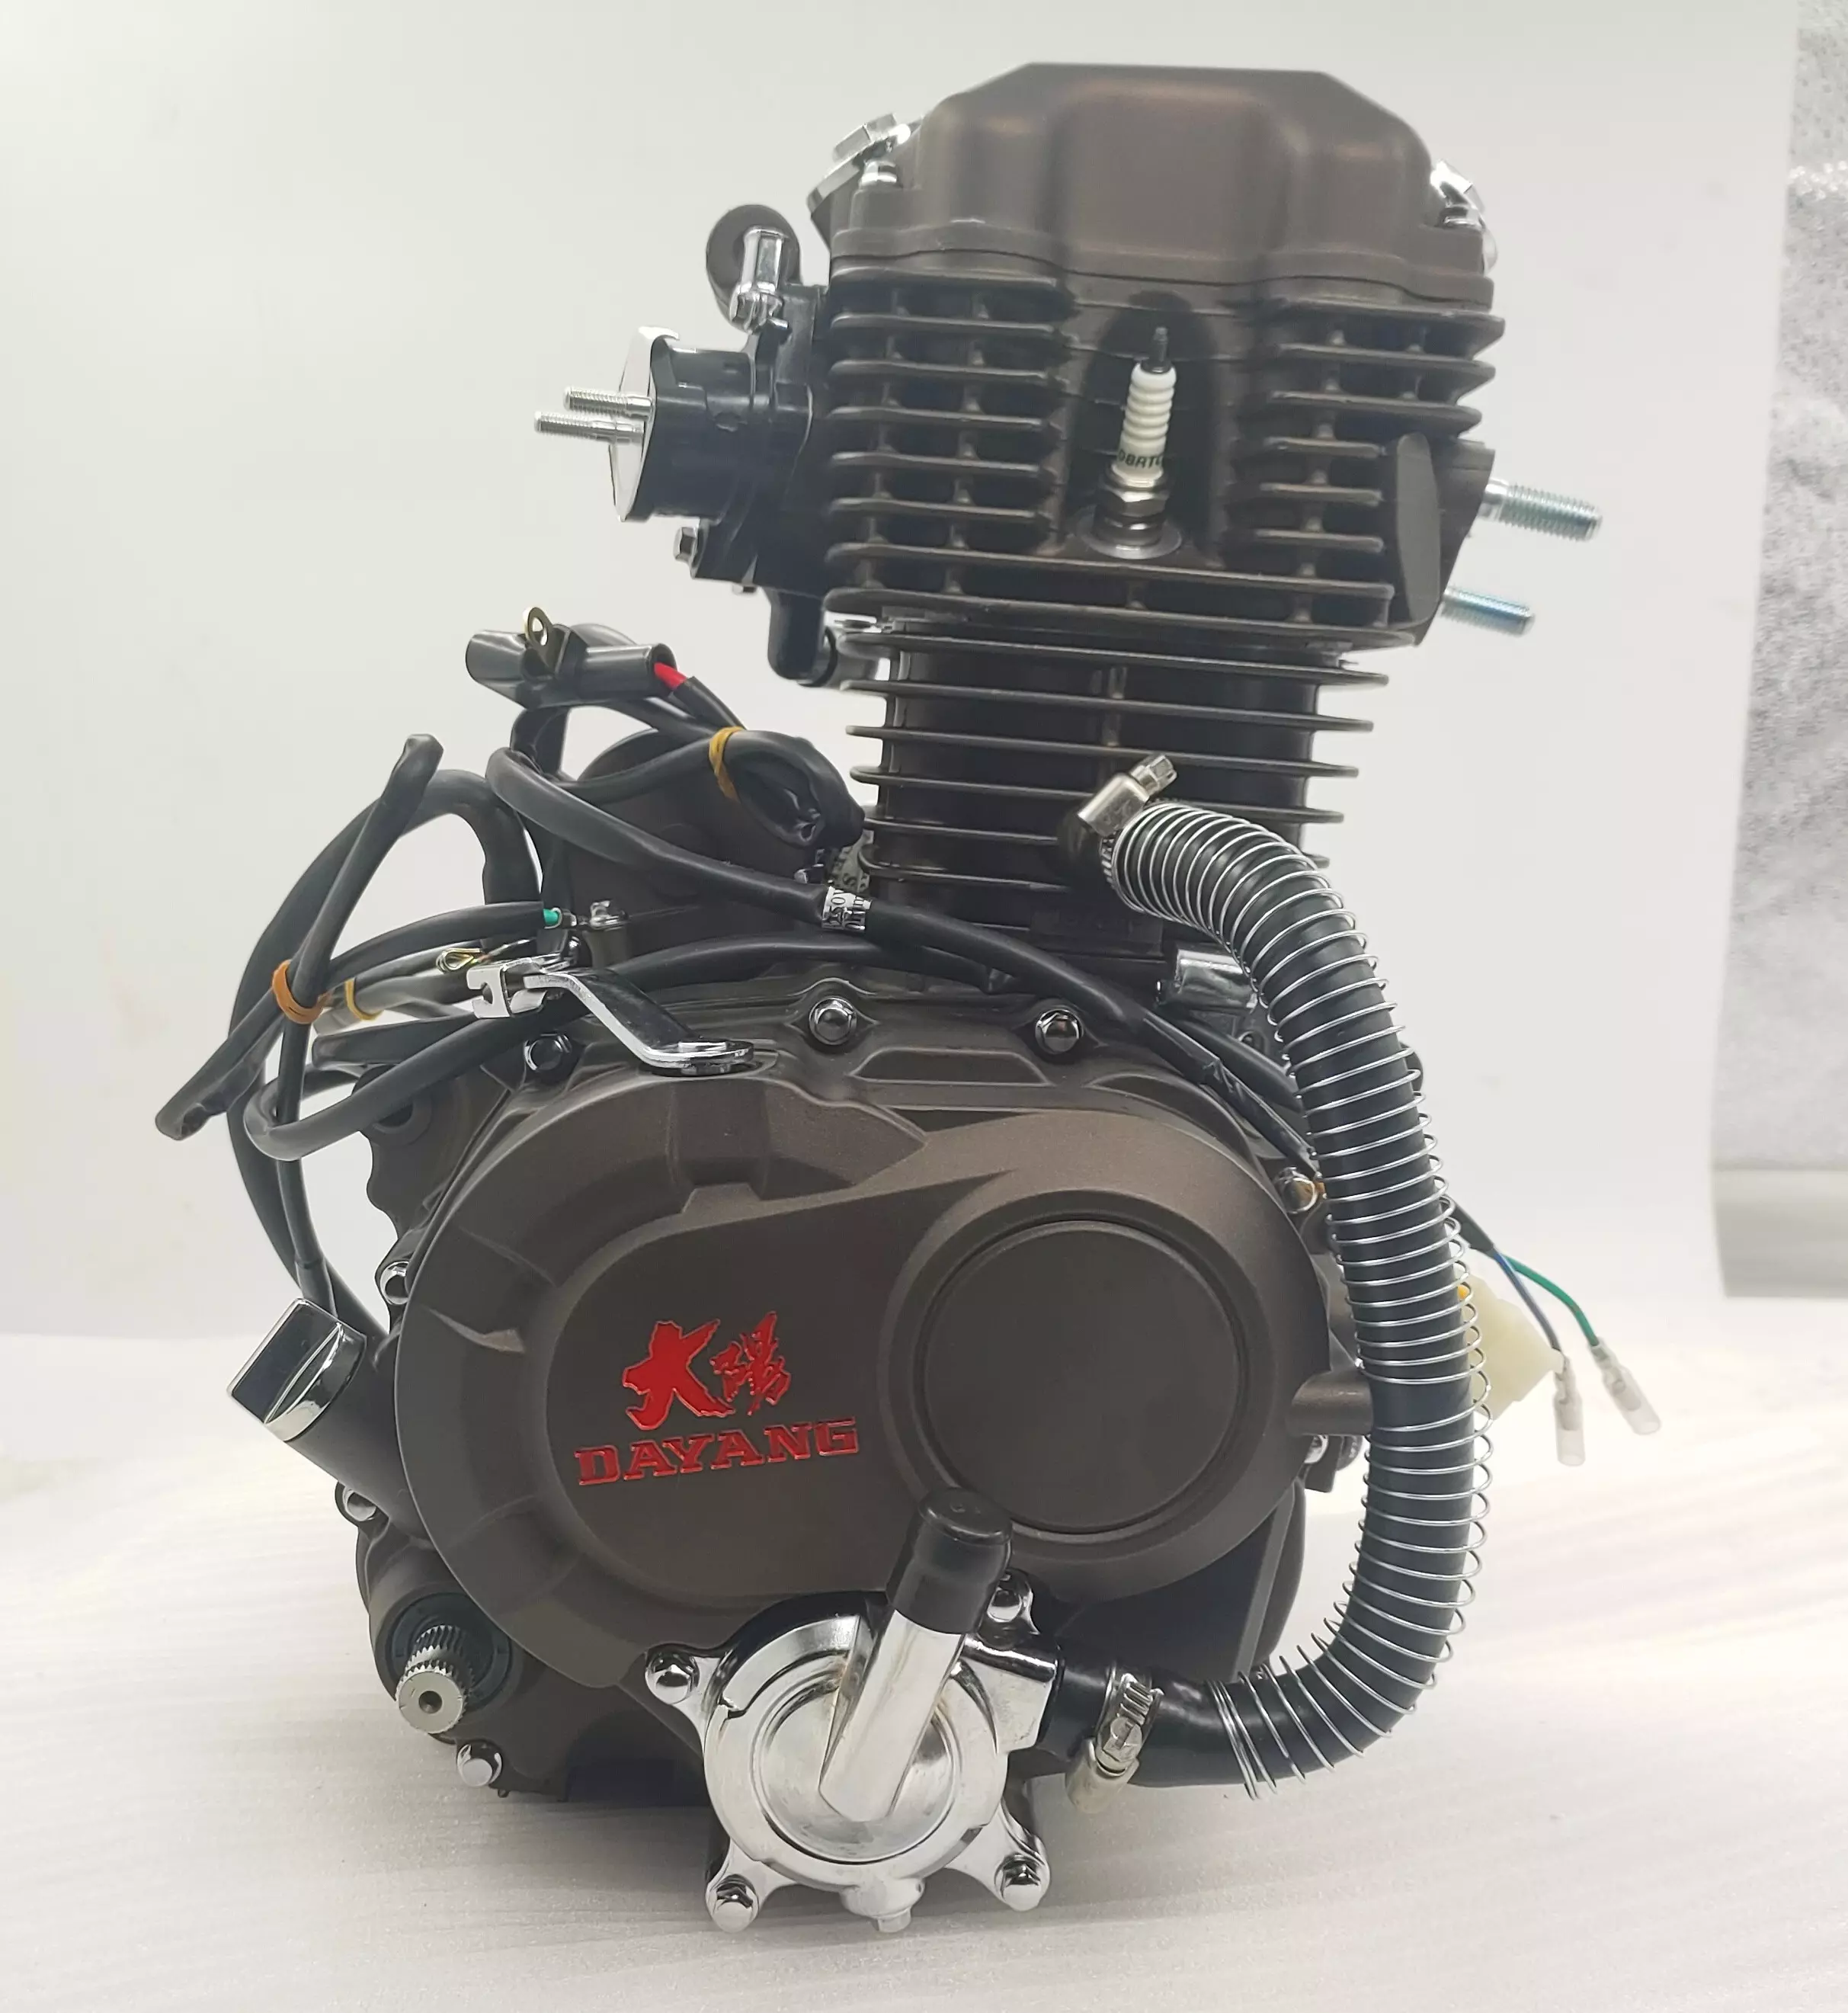 CG200 200cc New Super Cool DAYANG LIFAN Engine Single Cylinder Style Electric/Kick Method Origin Type High Quality made in China